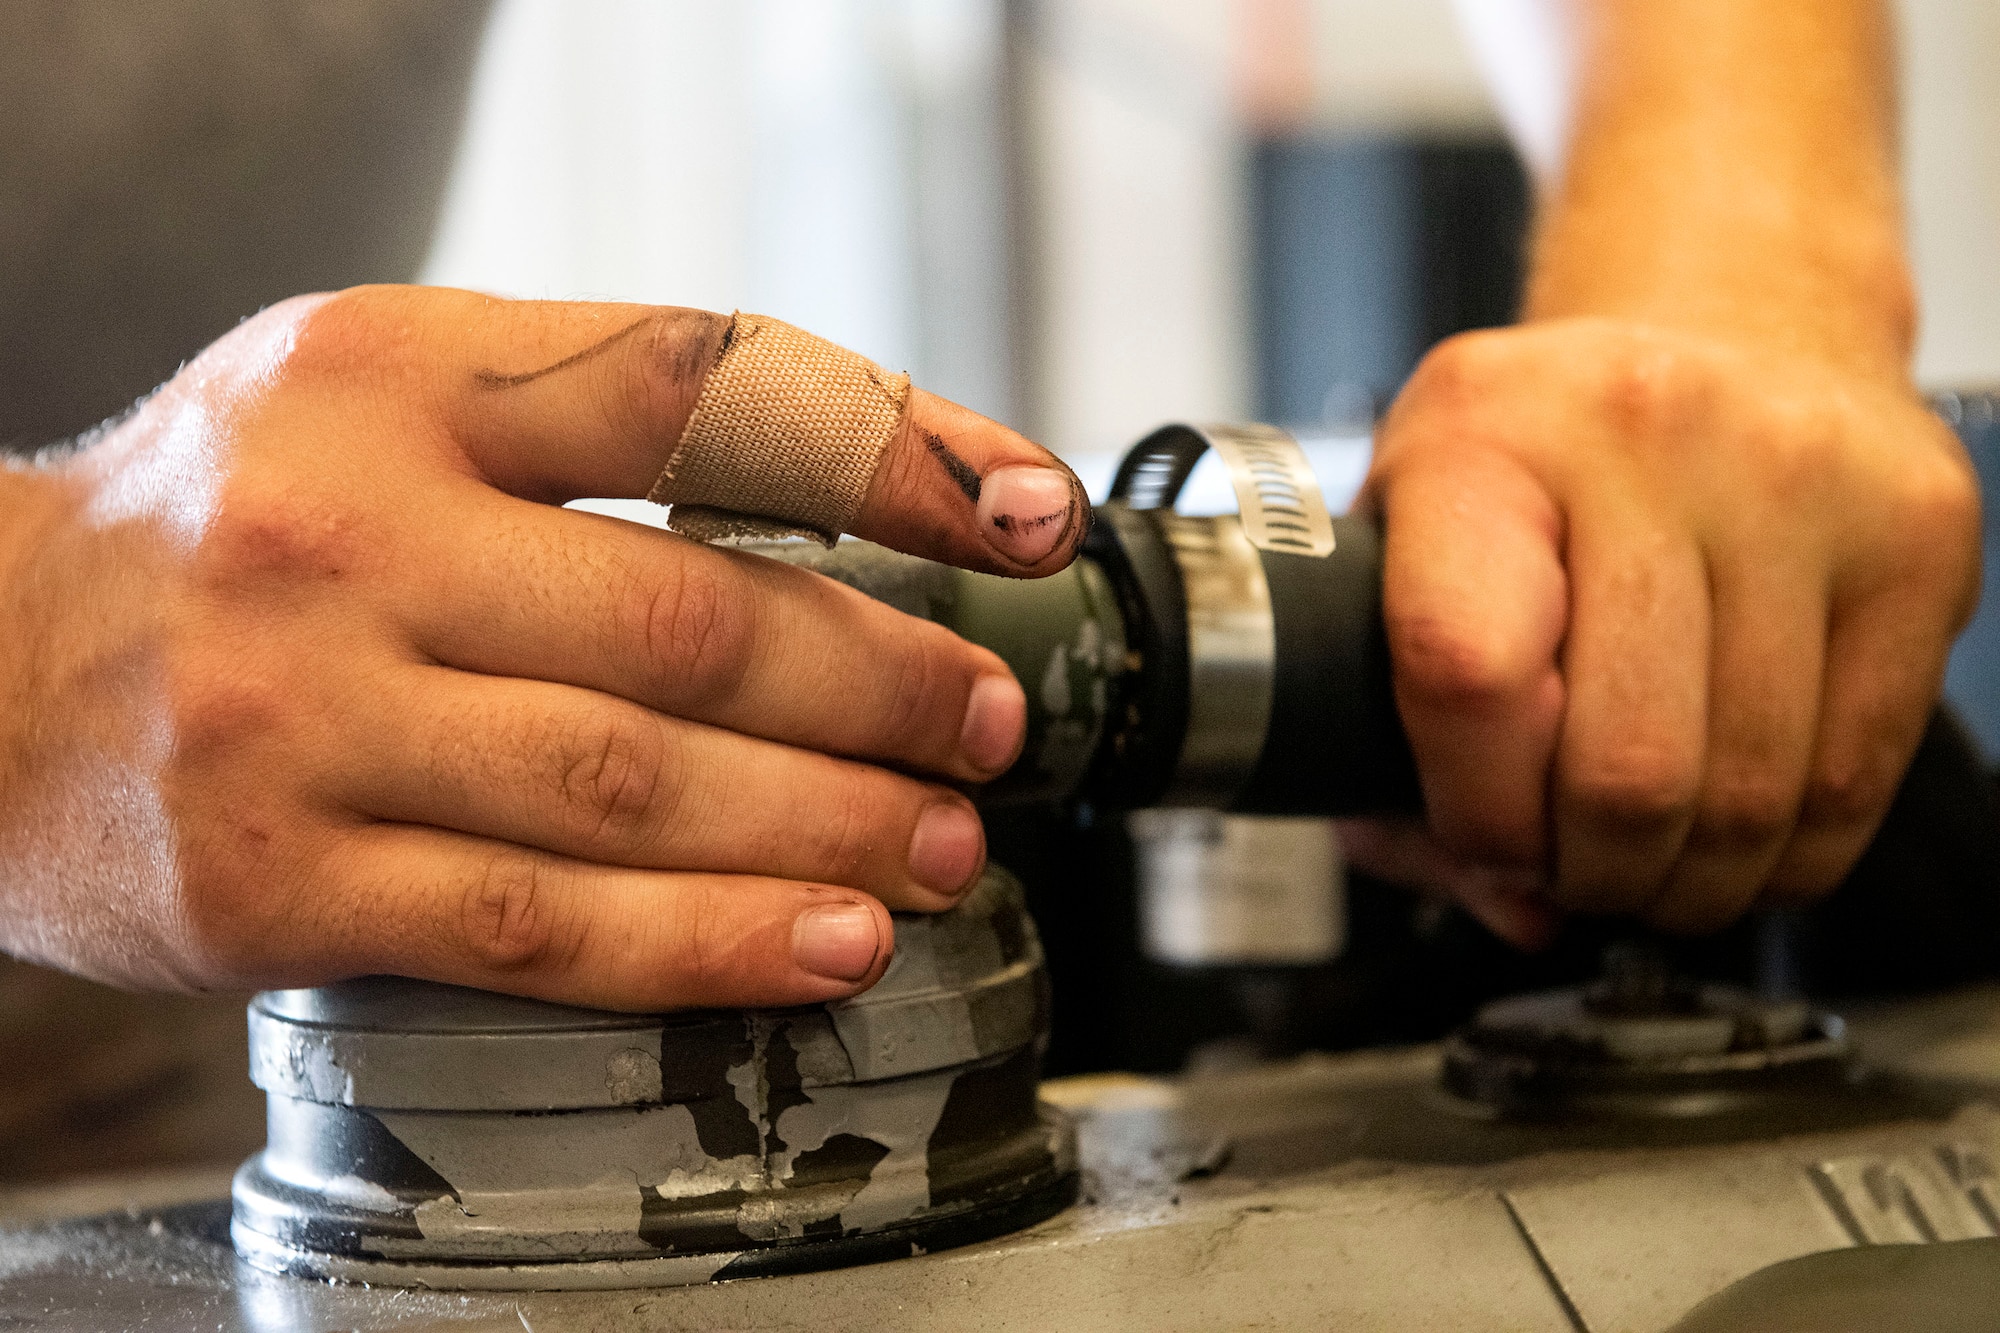 Senior Airman Hunter Gore, 23d Maintenance Squadron aerospace ground equipment (AGE) journeyman, performs inspections on a valve cover during a flight training day, June 21, 2019, at Moody Air Force Base, Ga. The training offered Gore a chance to improve his preventative maintenance efforts on the equipment AGE Airmen service. (U.S. Air Force photo by Senior Airman Erick Requadt)